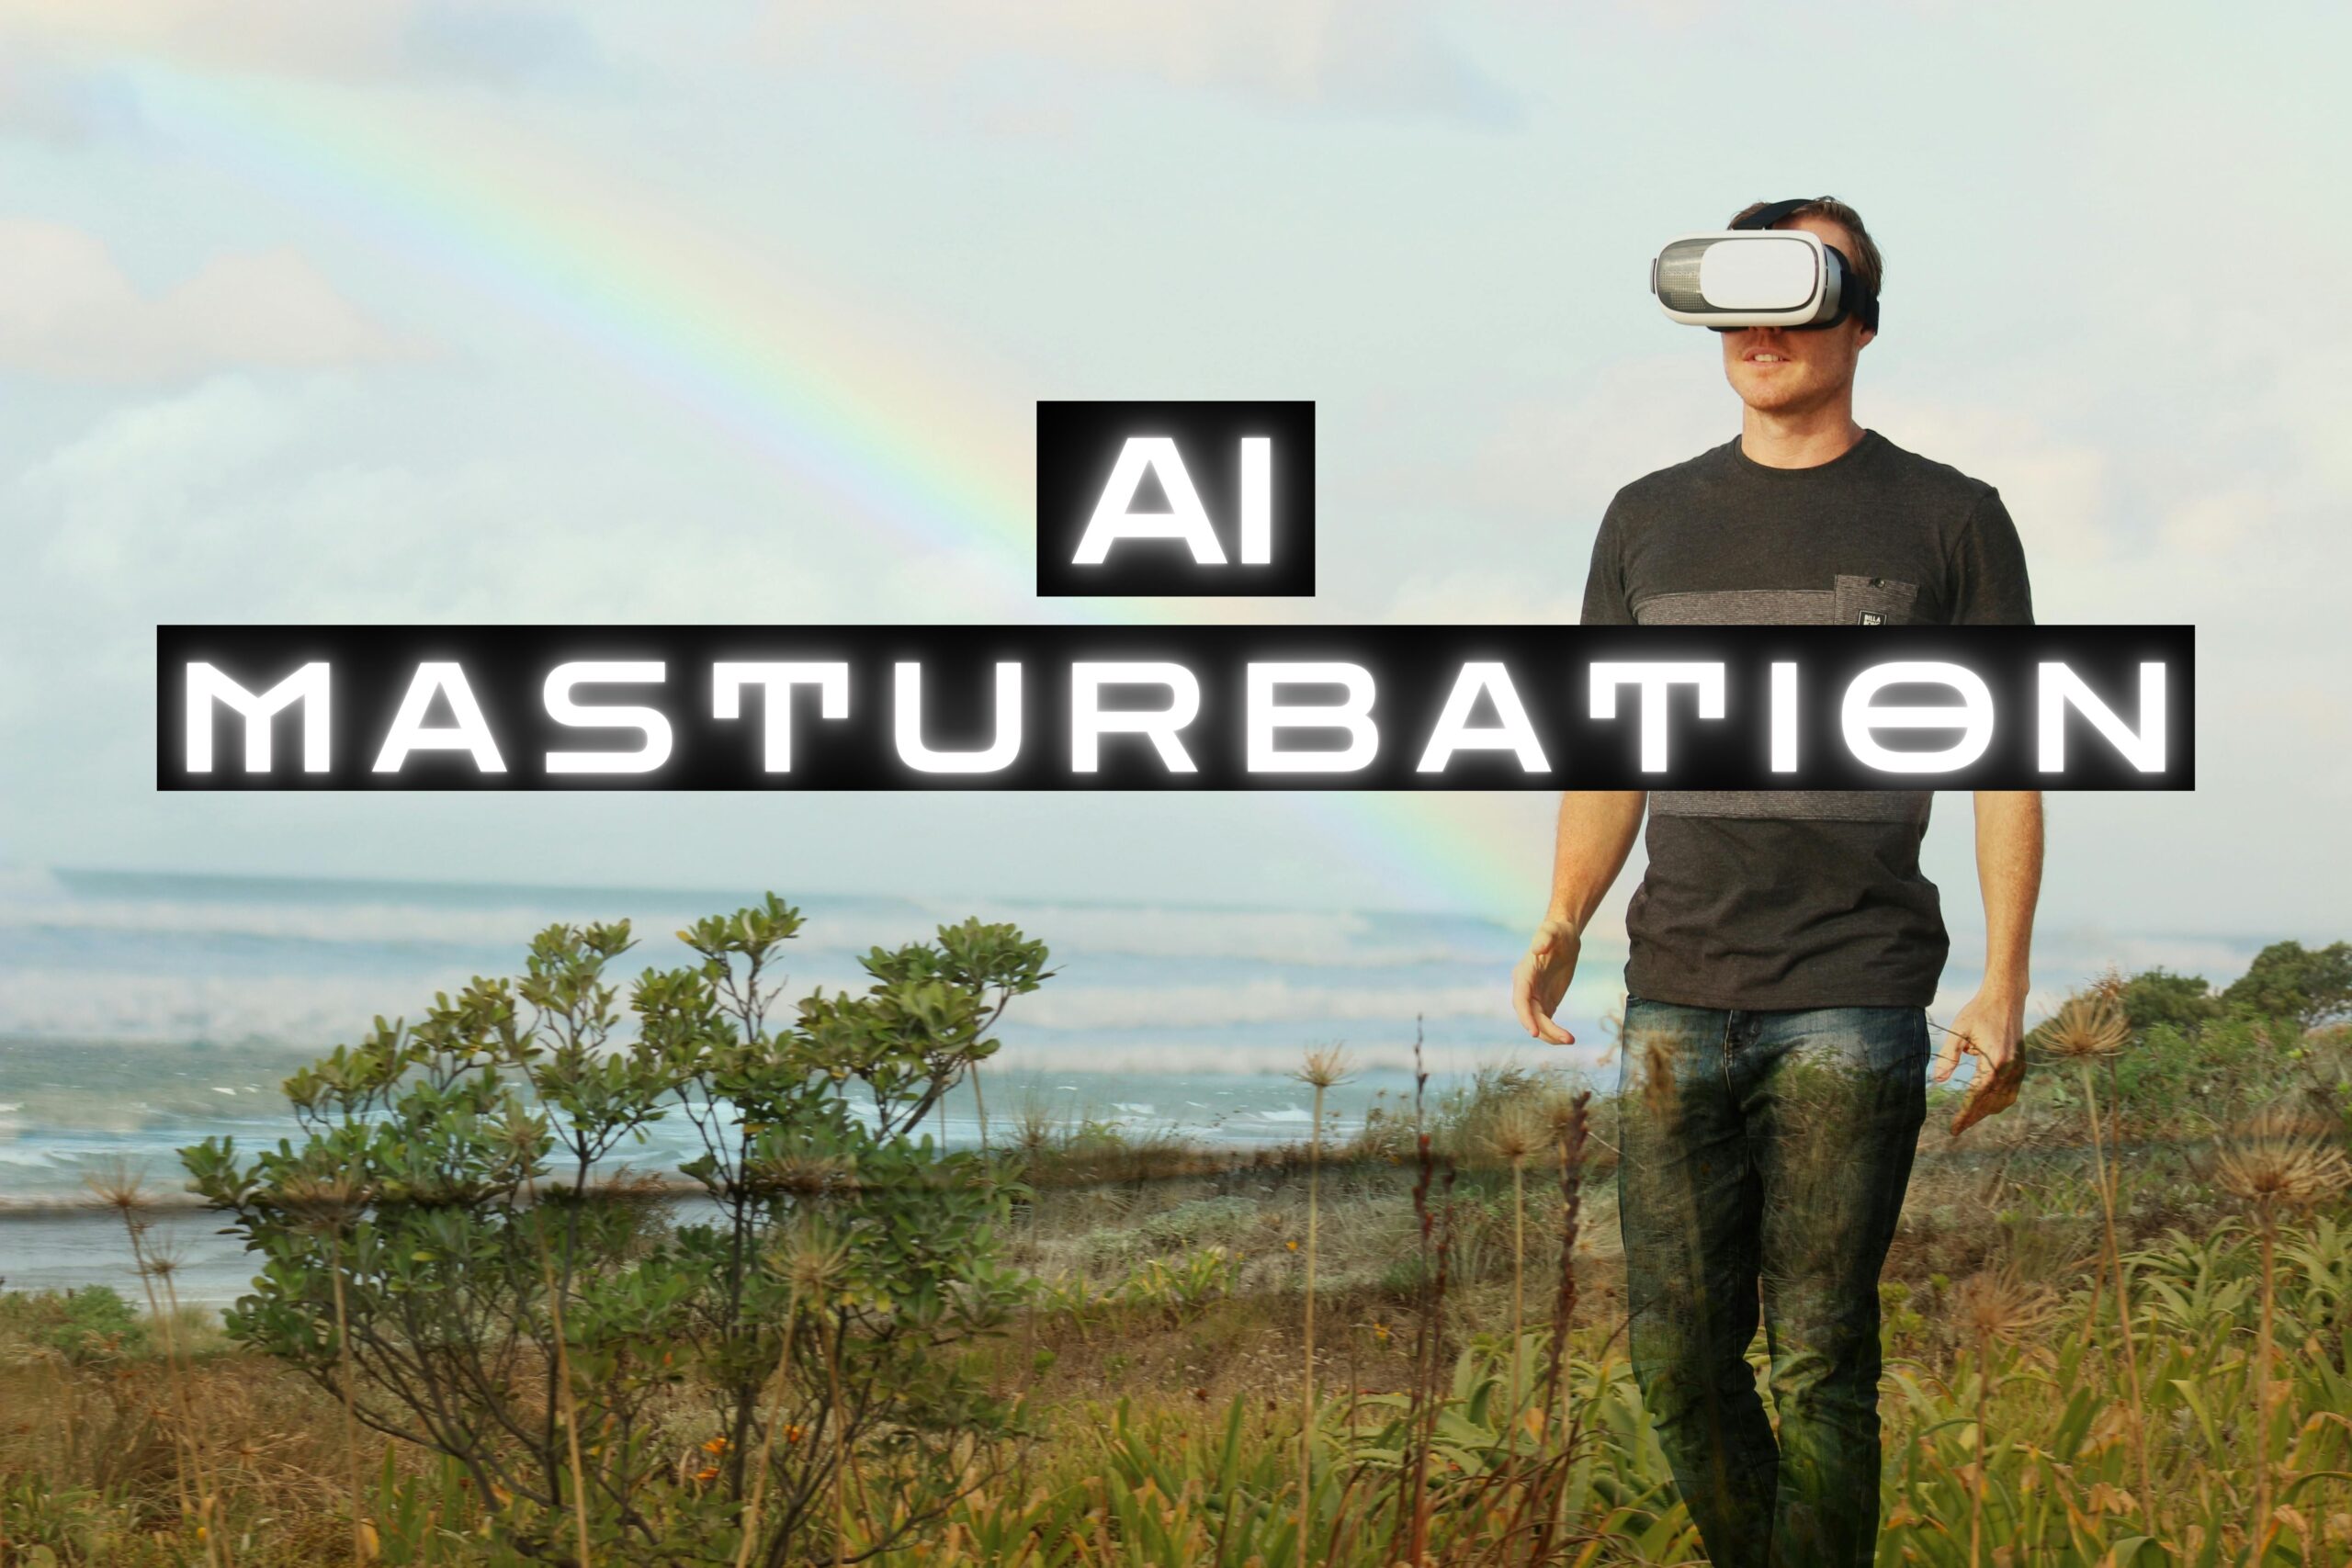 A man waking through a field with an ai headset on